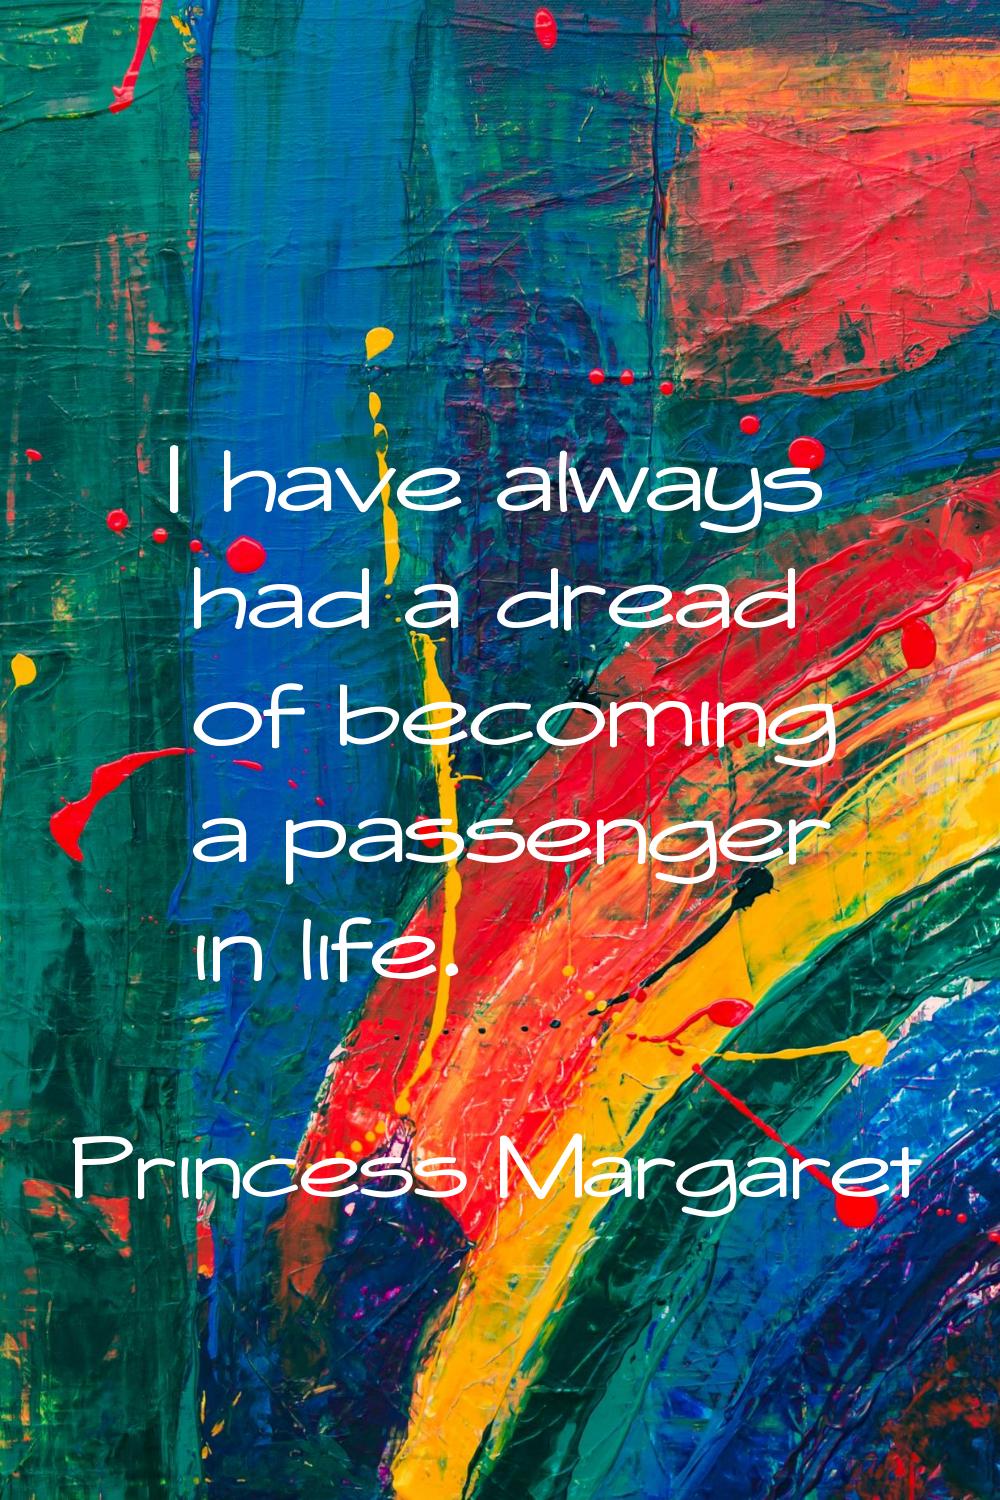 I have always had a dread of becoming a passenger in life.